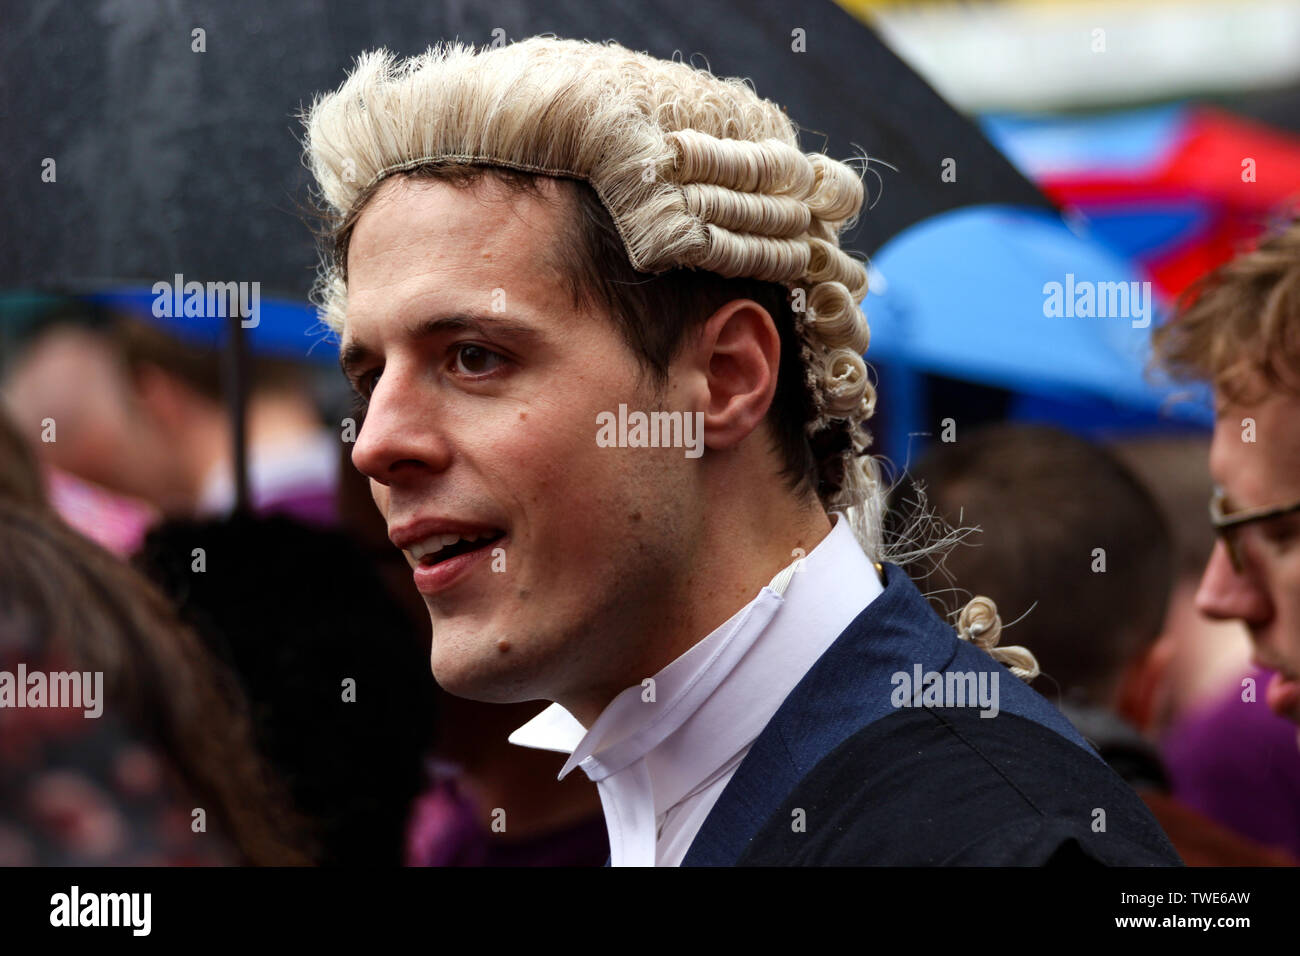 Man with barrister wig in Pride in London Parade 2014 in London, England Stock Photo